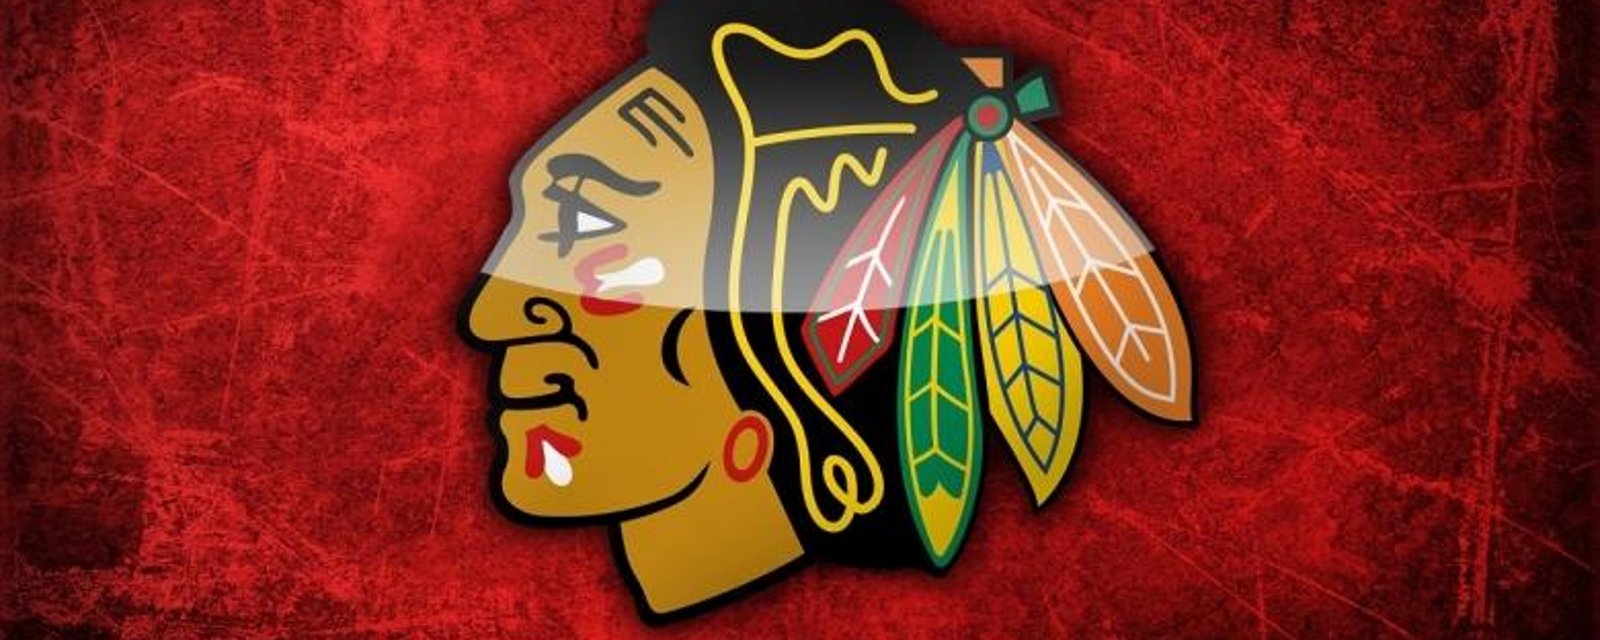 Chicago Blackhawks hoping to hit another offseason home run.